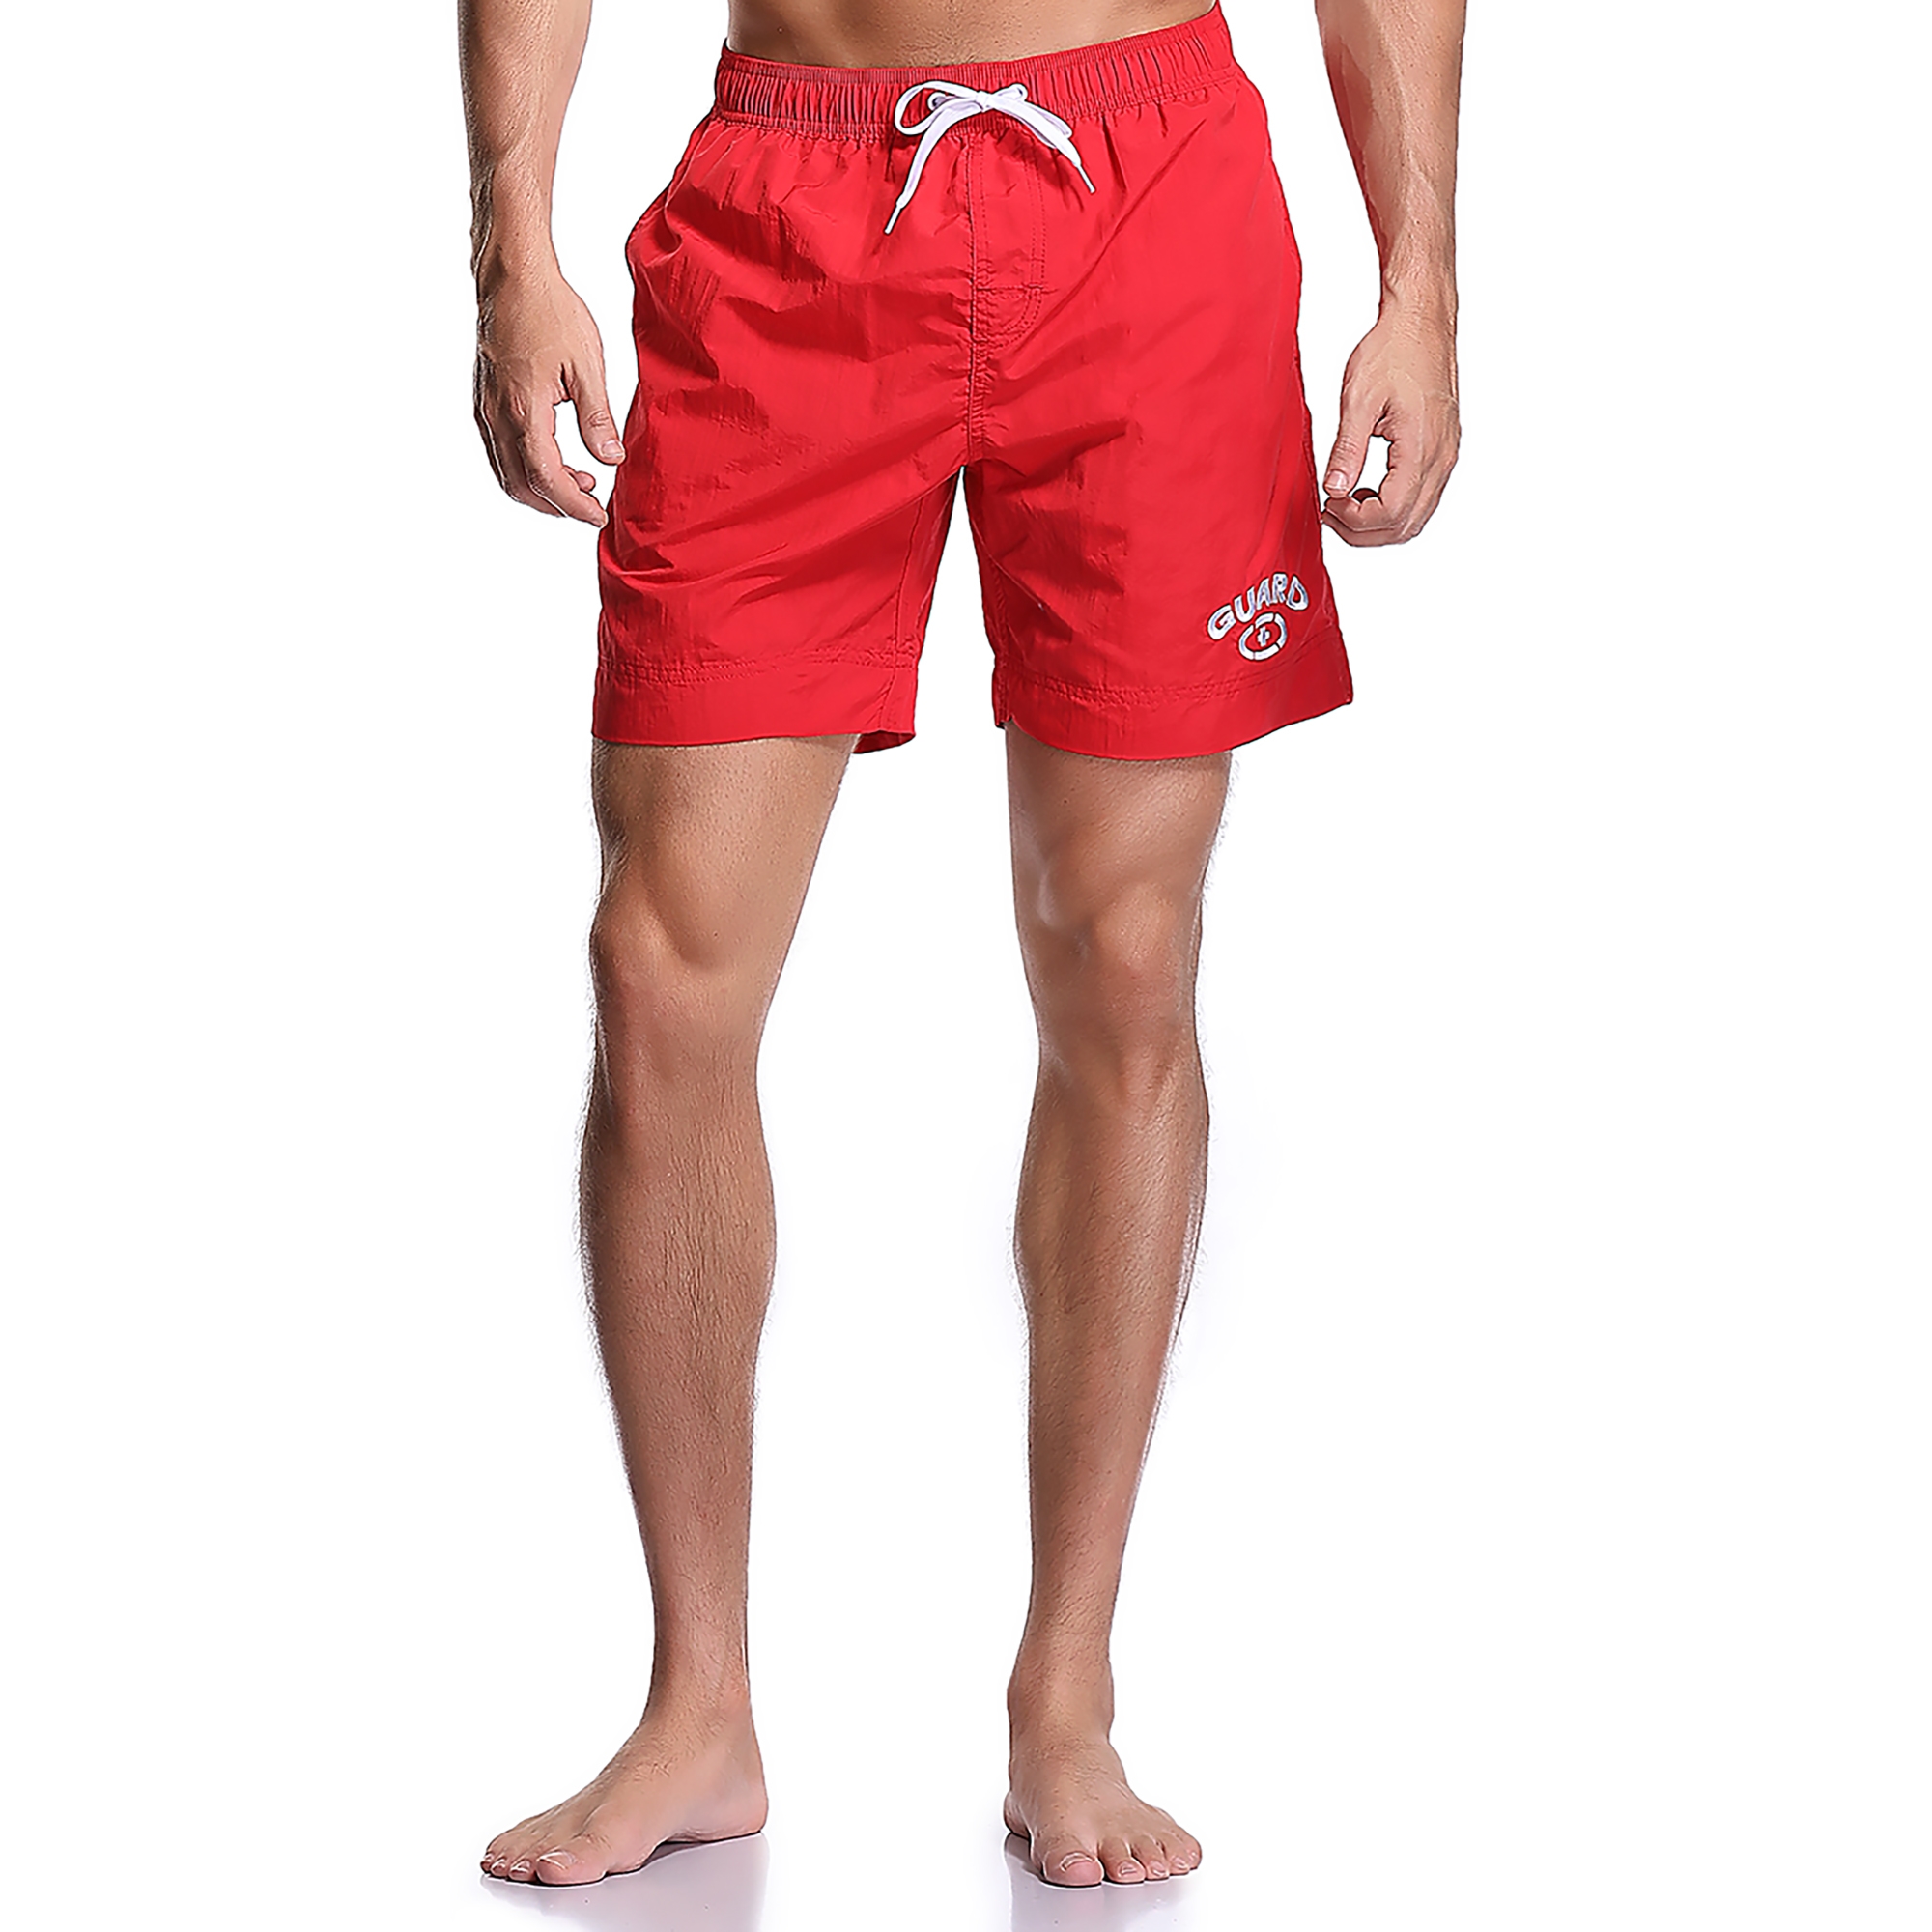 Mens Swimsuit New XXL XL L or S Swim Trunks Red or Black Mesh-Lining Lifeguard